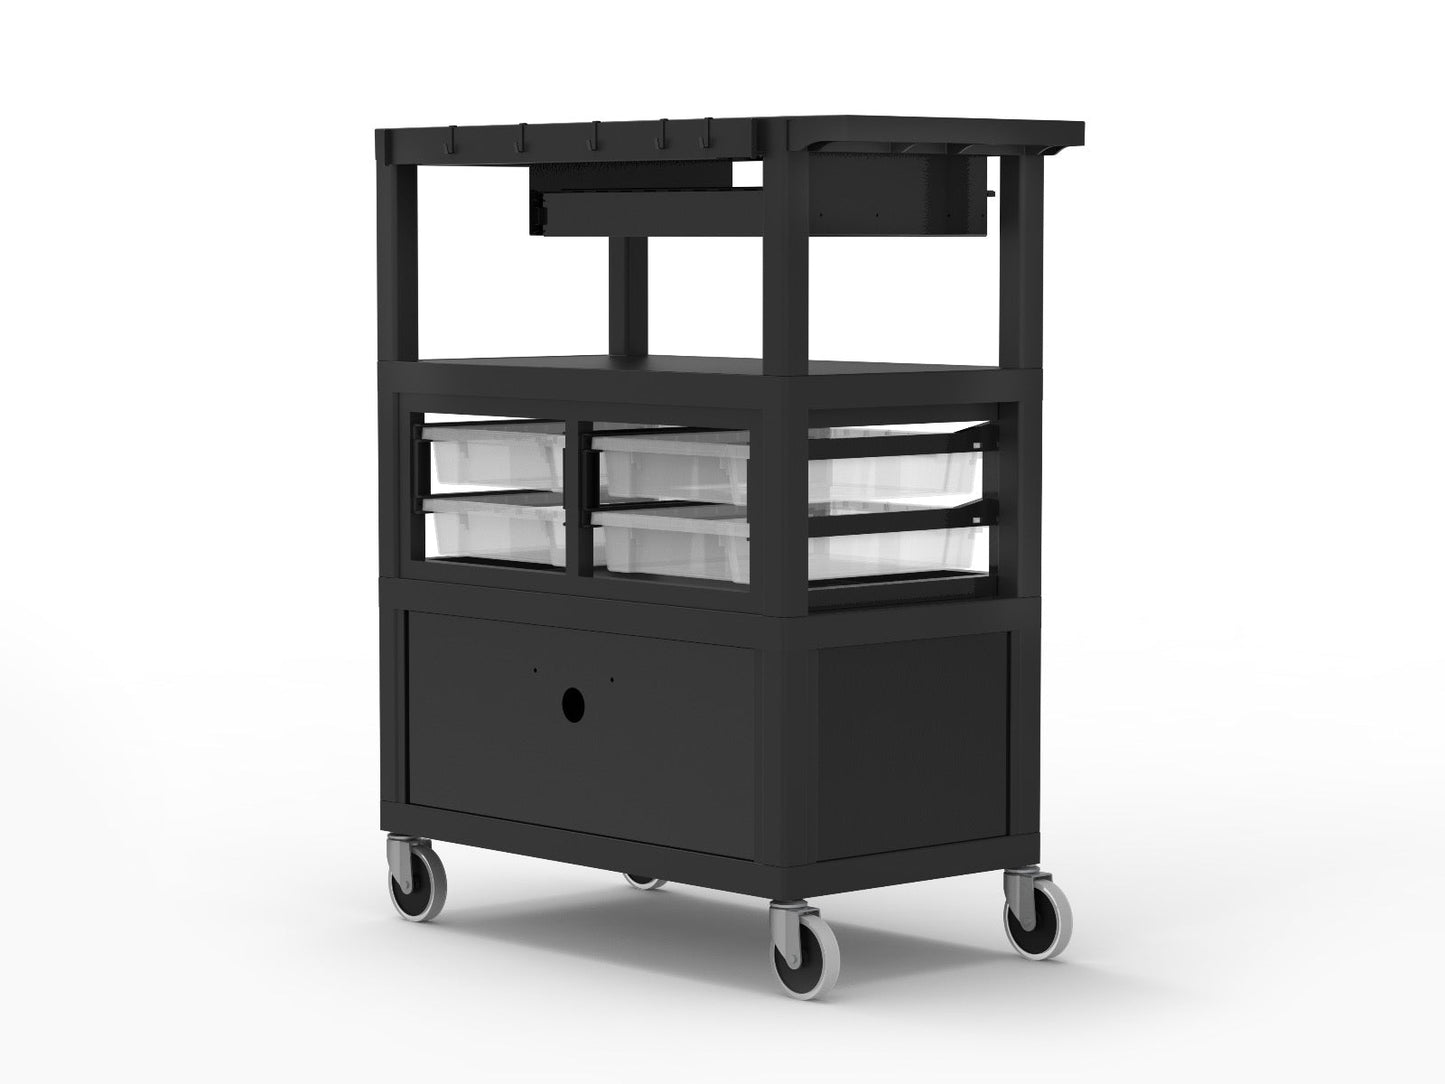 Luxor Deluxe Teacher Cart with Locking Cabinet Storage - Bins Keyboard, Tray Pocket, Chart Hooks and Cup Holder 32" x 18" (Luxor LUX-ECMBSKBC-B) - SchoolOutlet